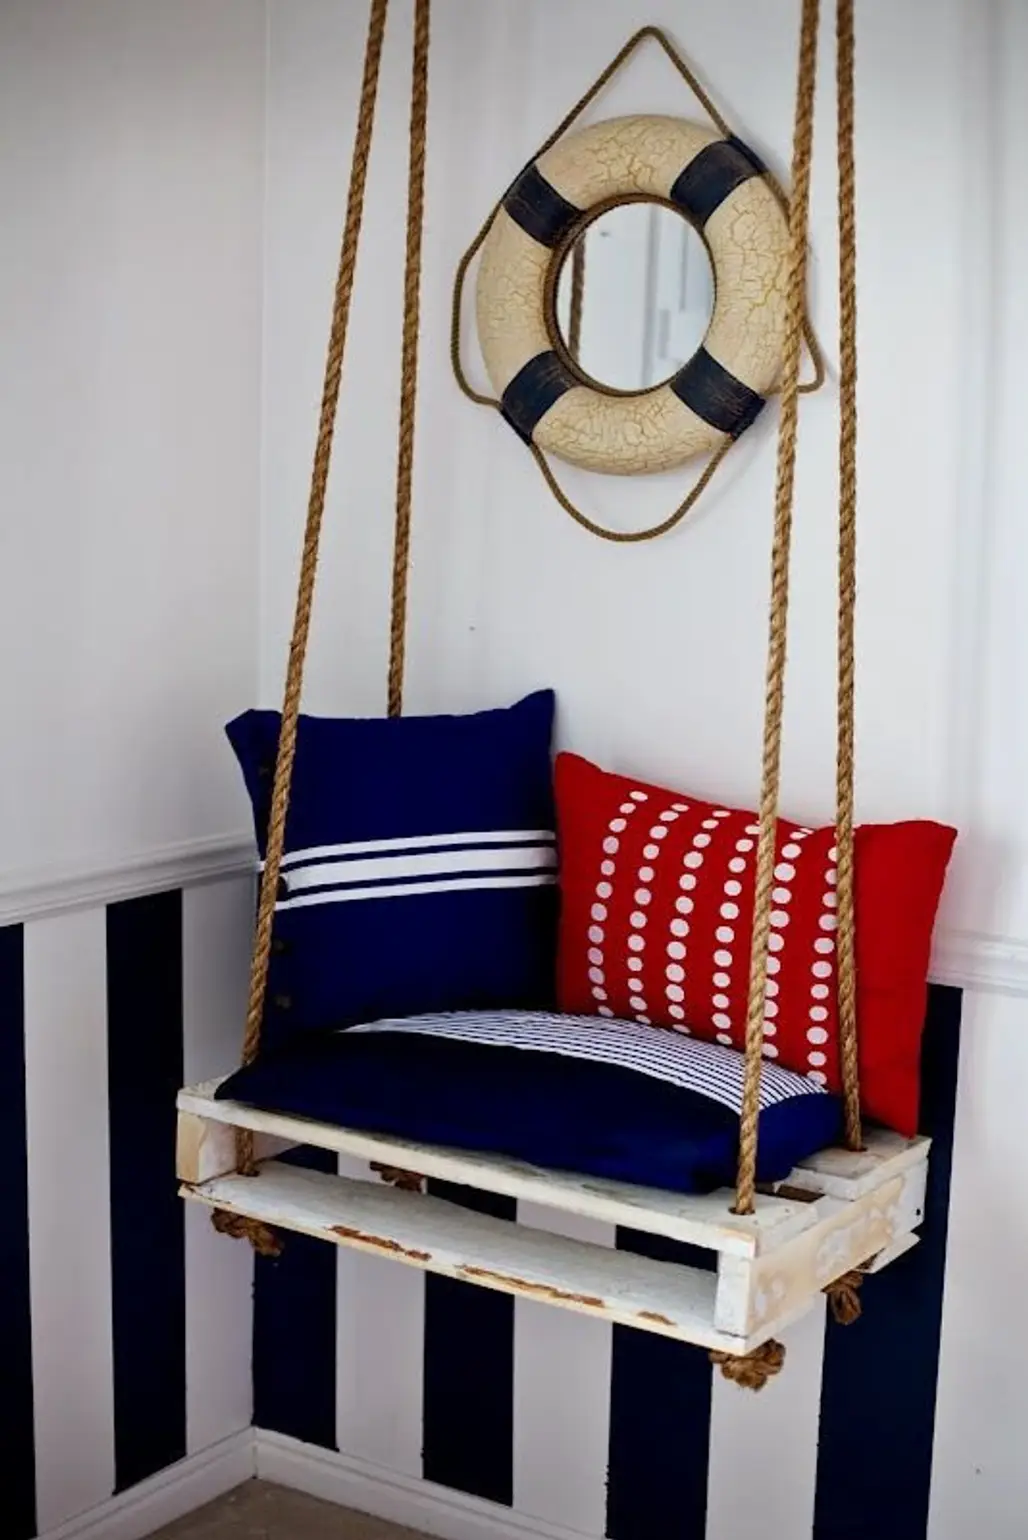 Swing Made from a Small Pallet